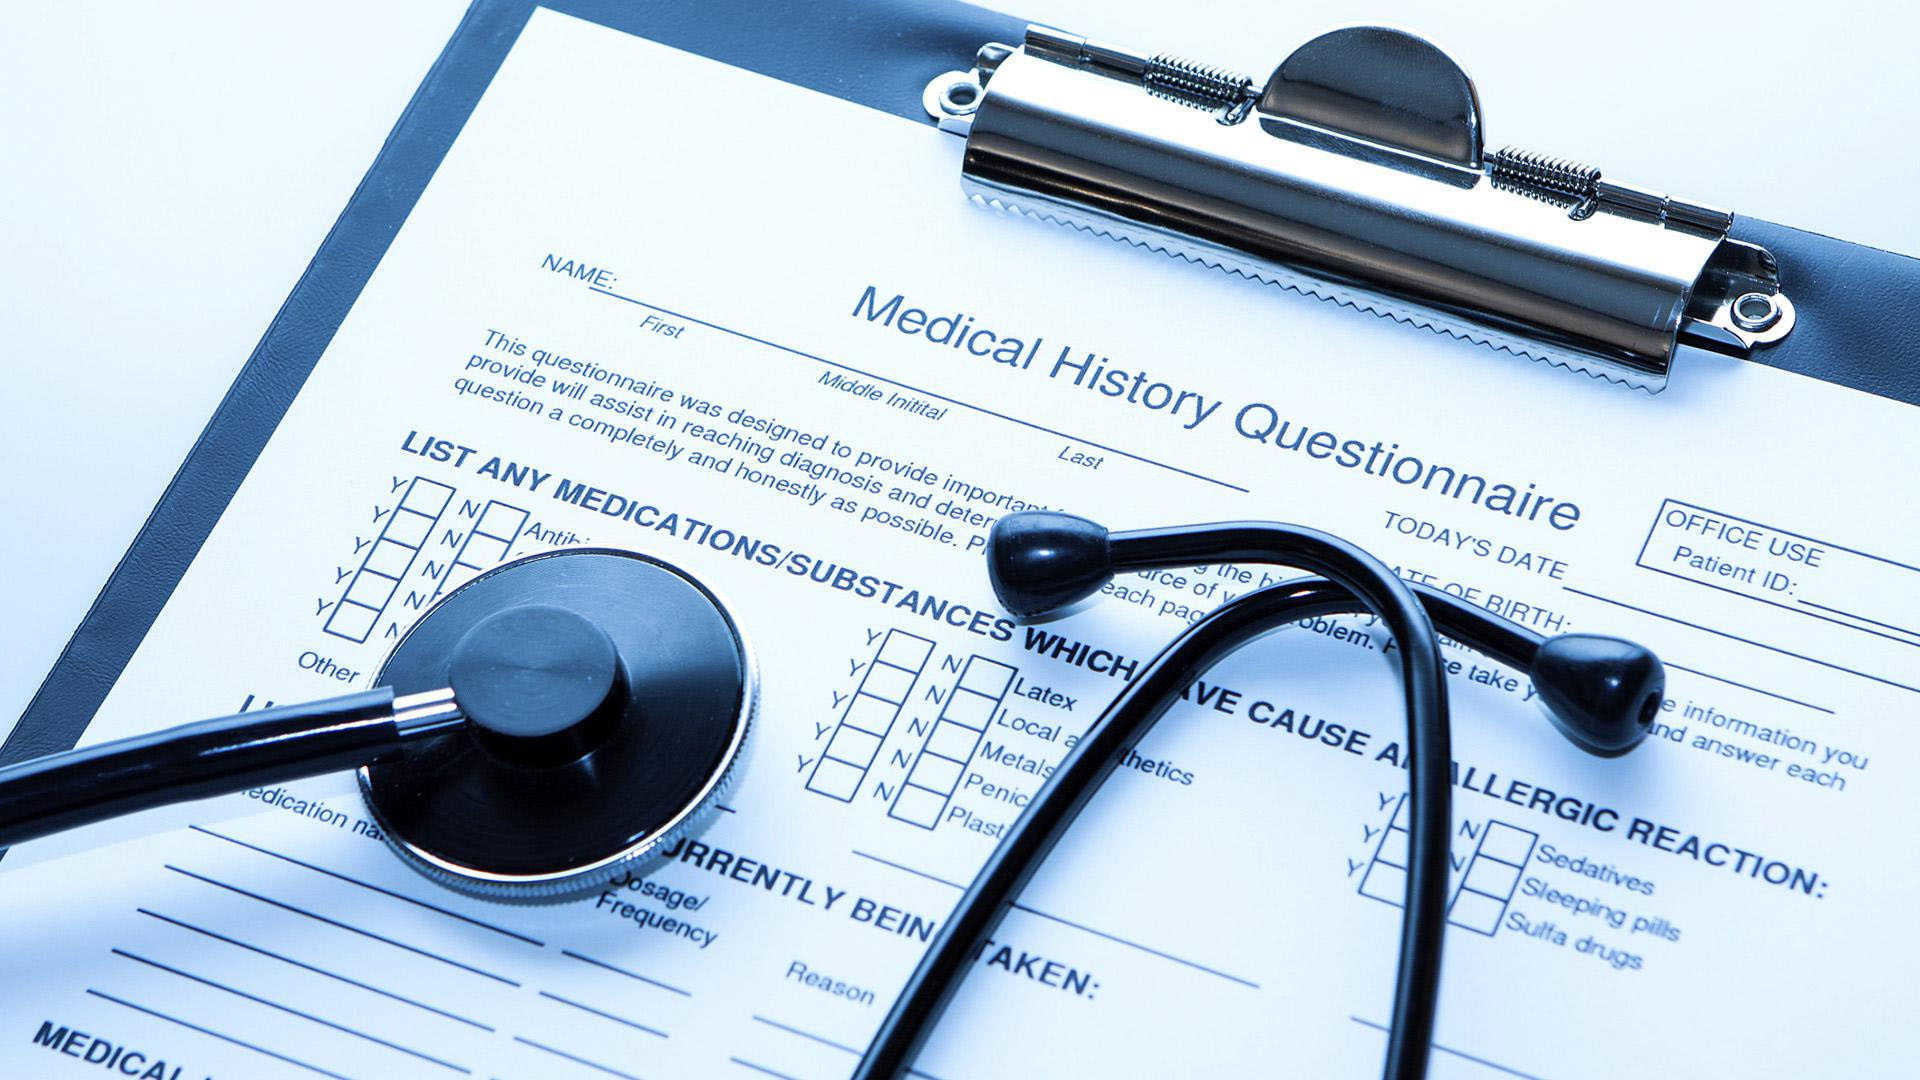 1920x1080 Medical Wallpapers Hd medical history questionnaire form hdwallwide .